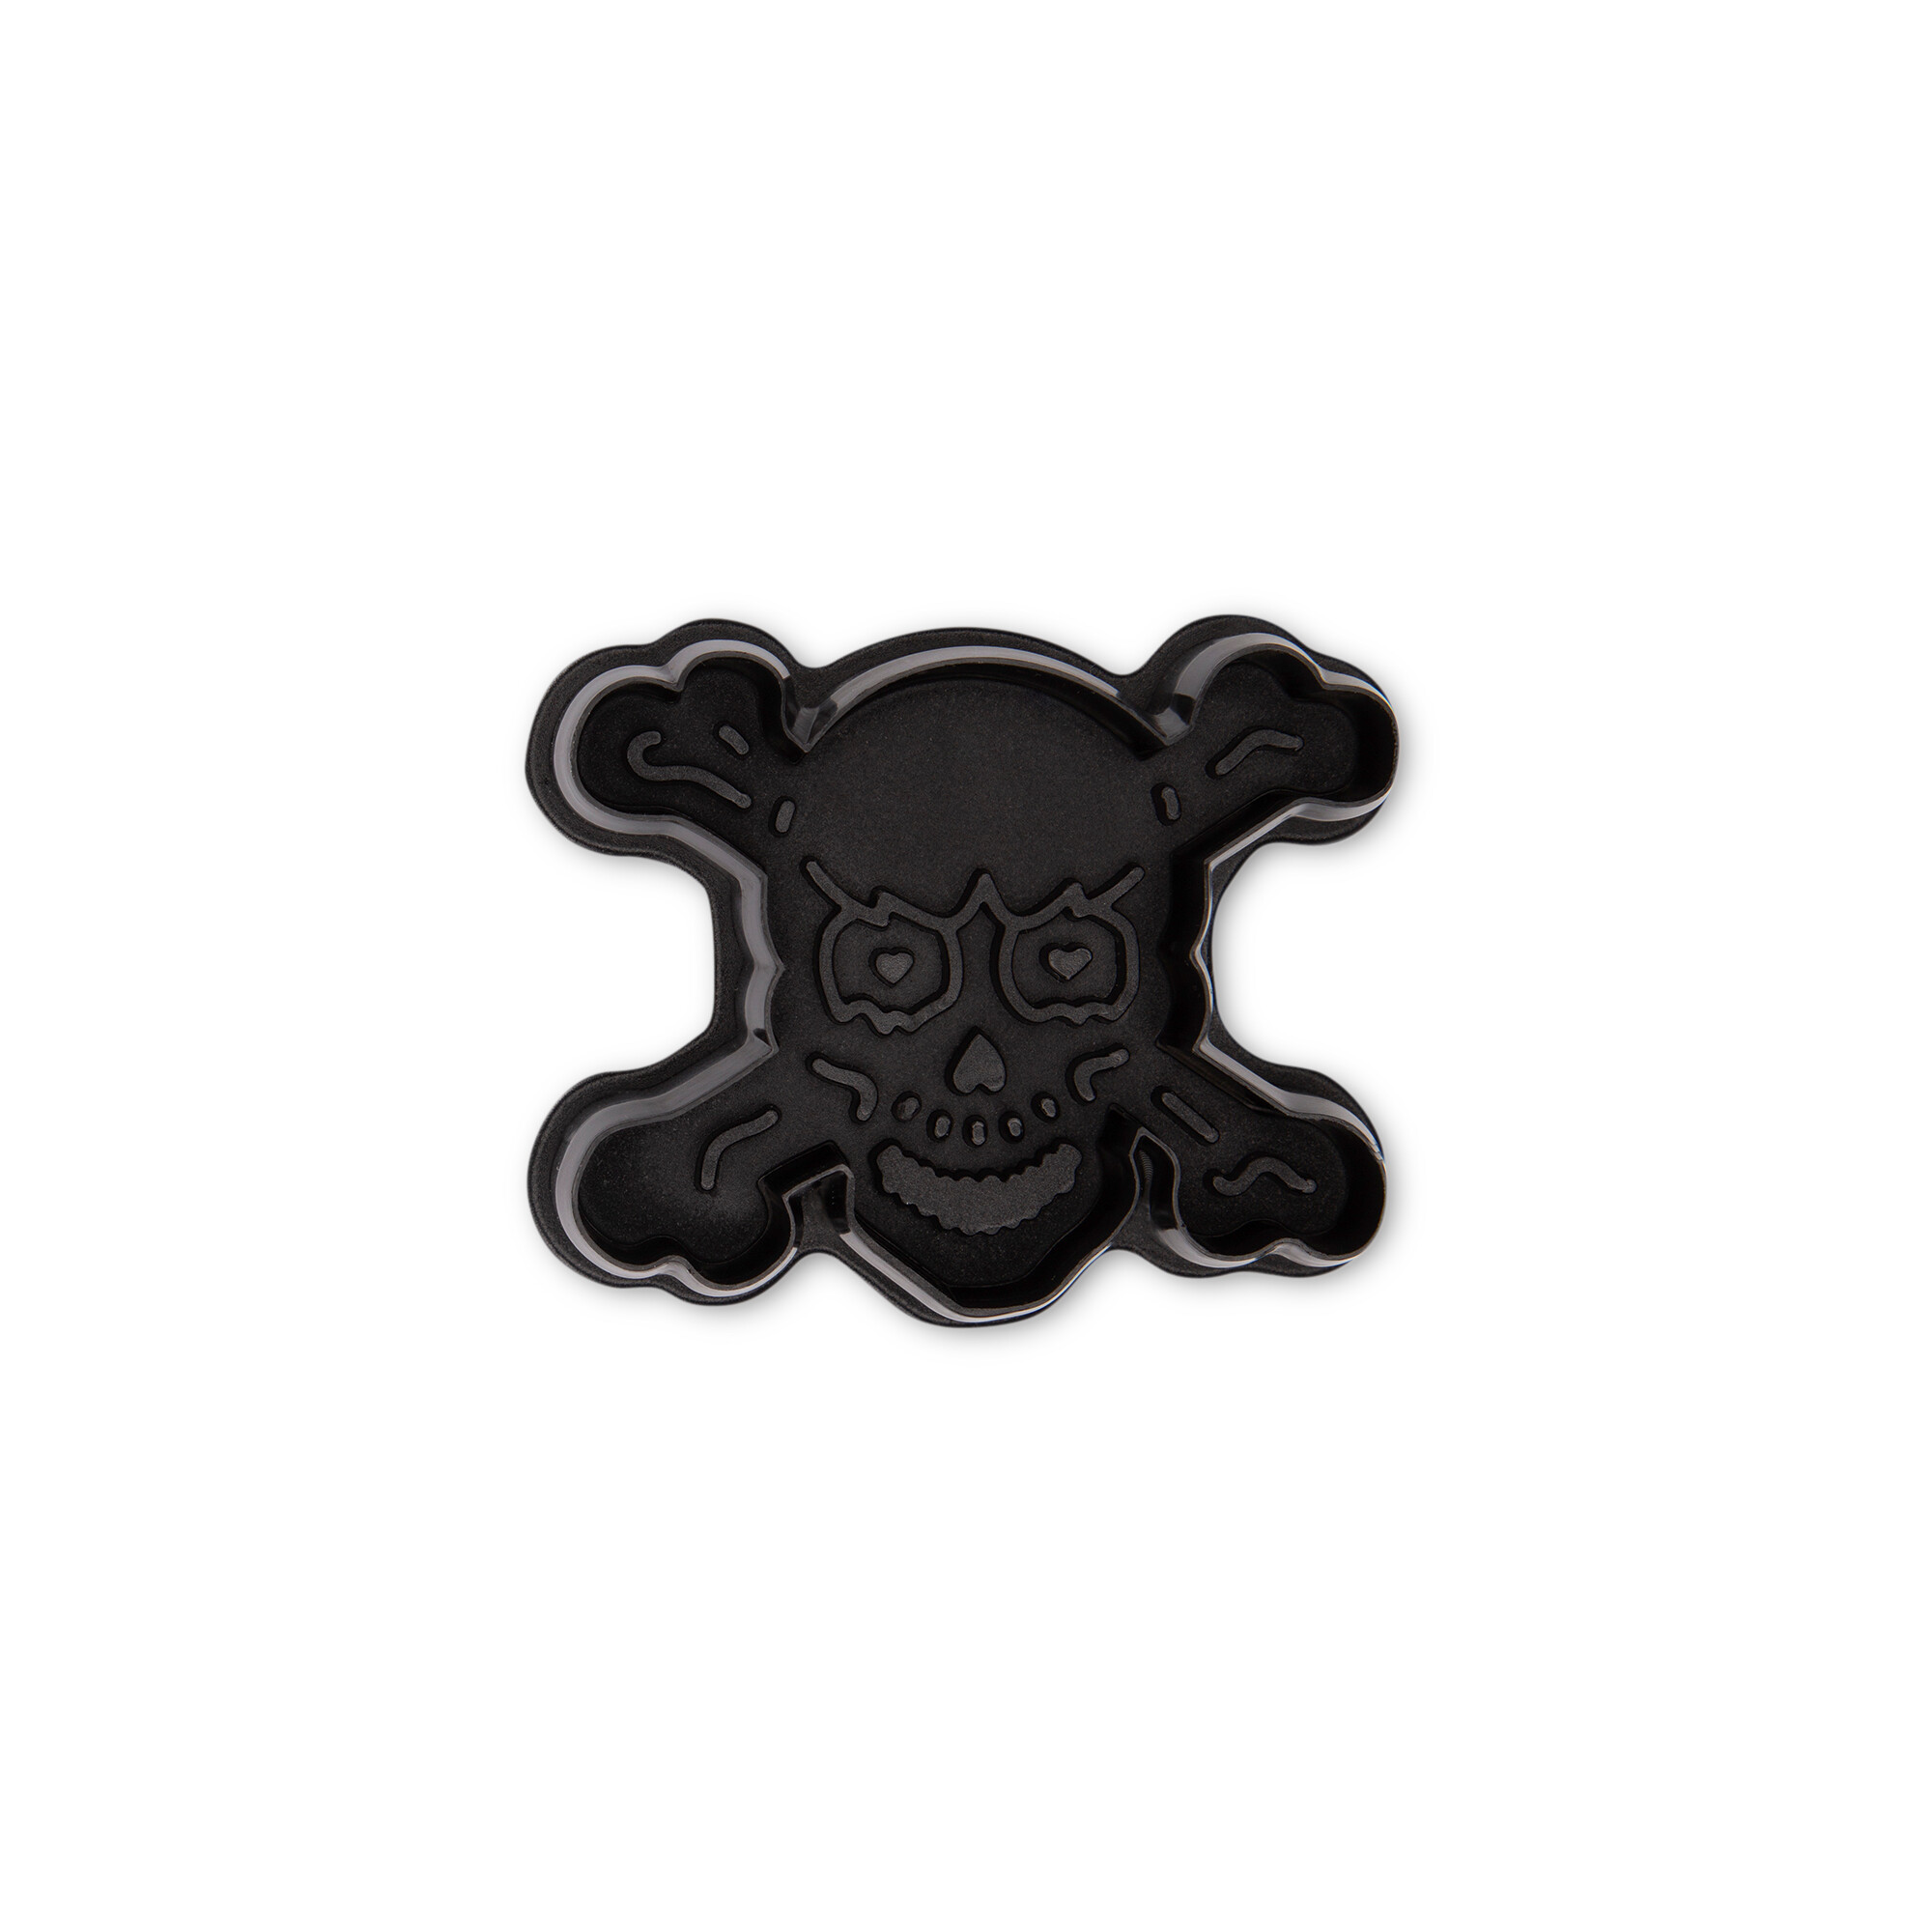 Cookie cutter with stamp and ejector – Skull